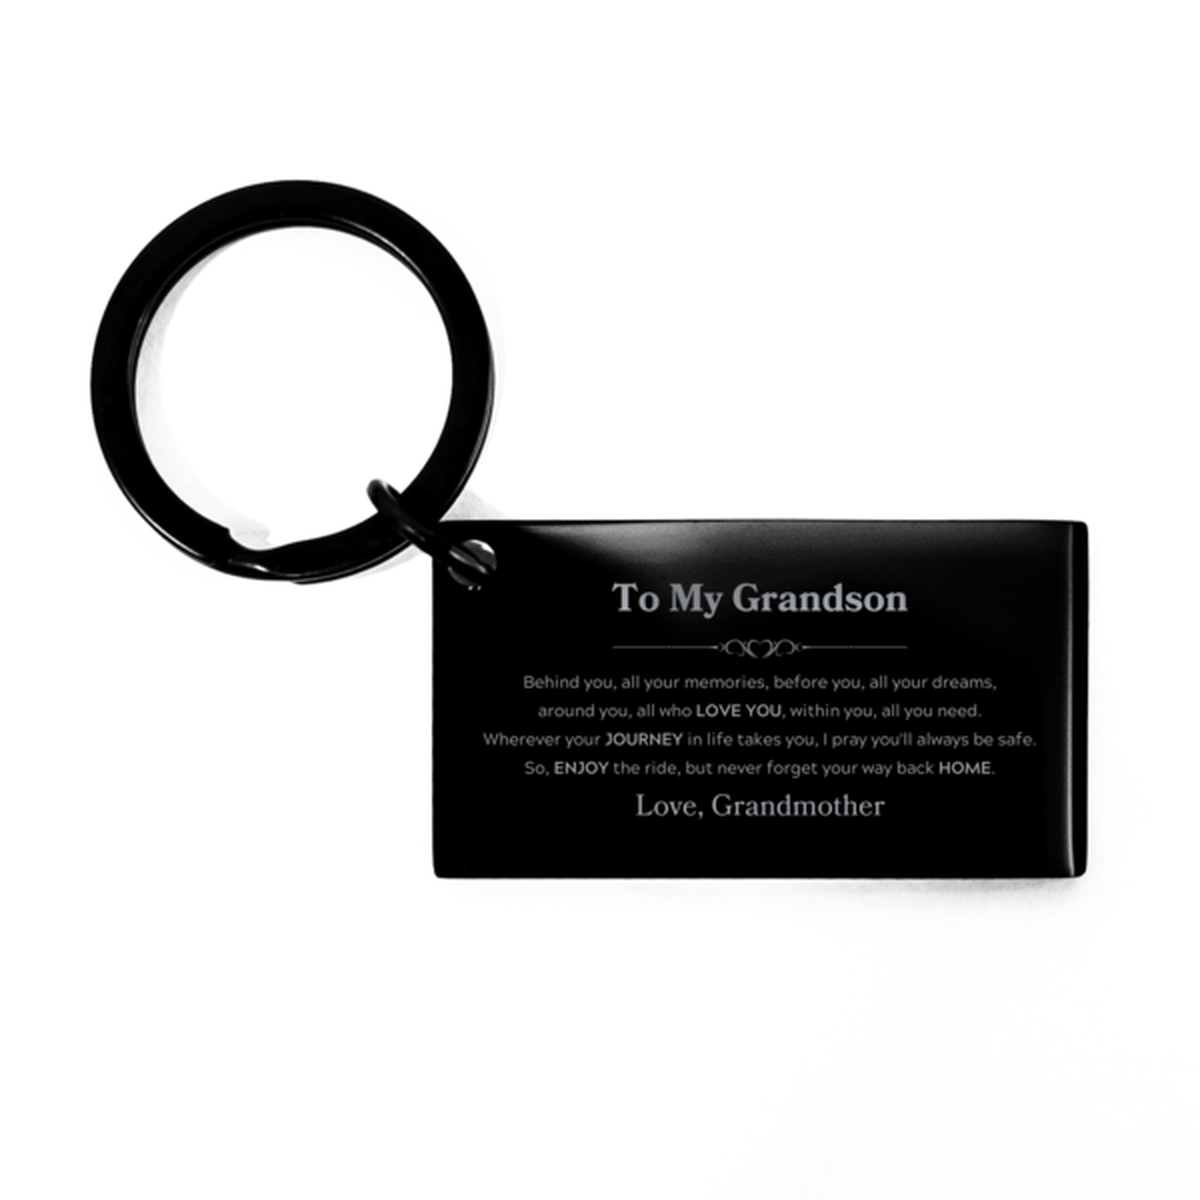 To My Grandson Graduation Gifts from Grandmother, Grandson Keychain Christmas Birthday Gifts for Grandson Behind you, all your memories, before you, all your dreams. Love, Grandmother